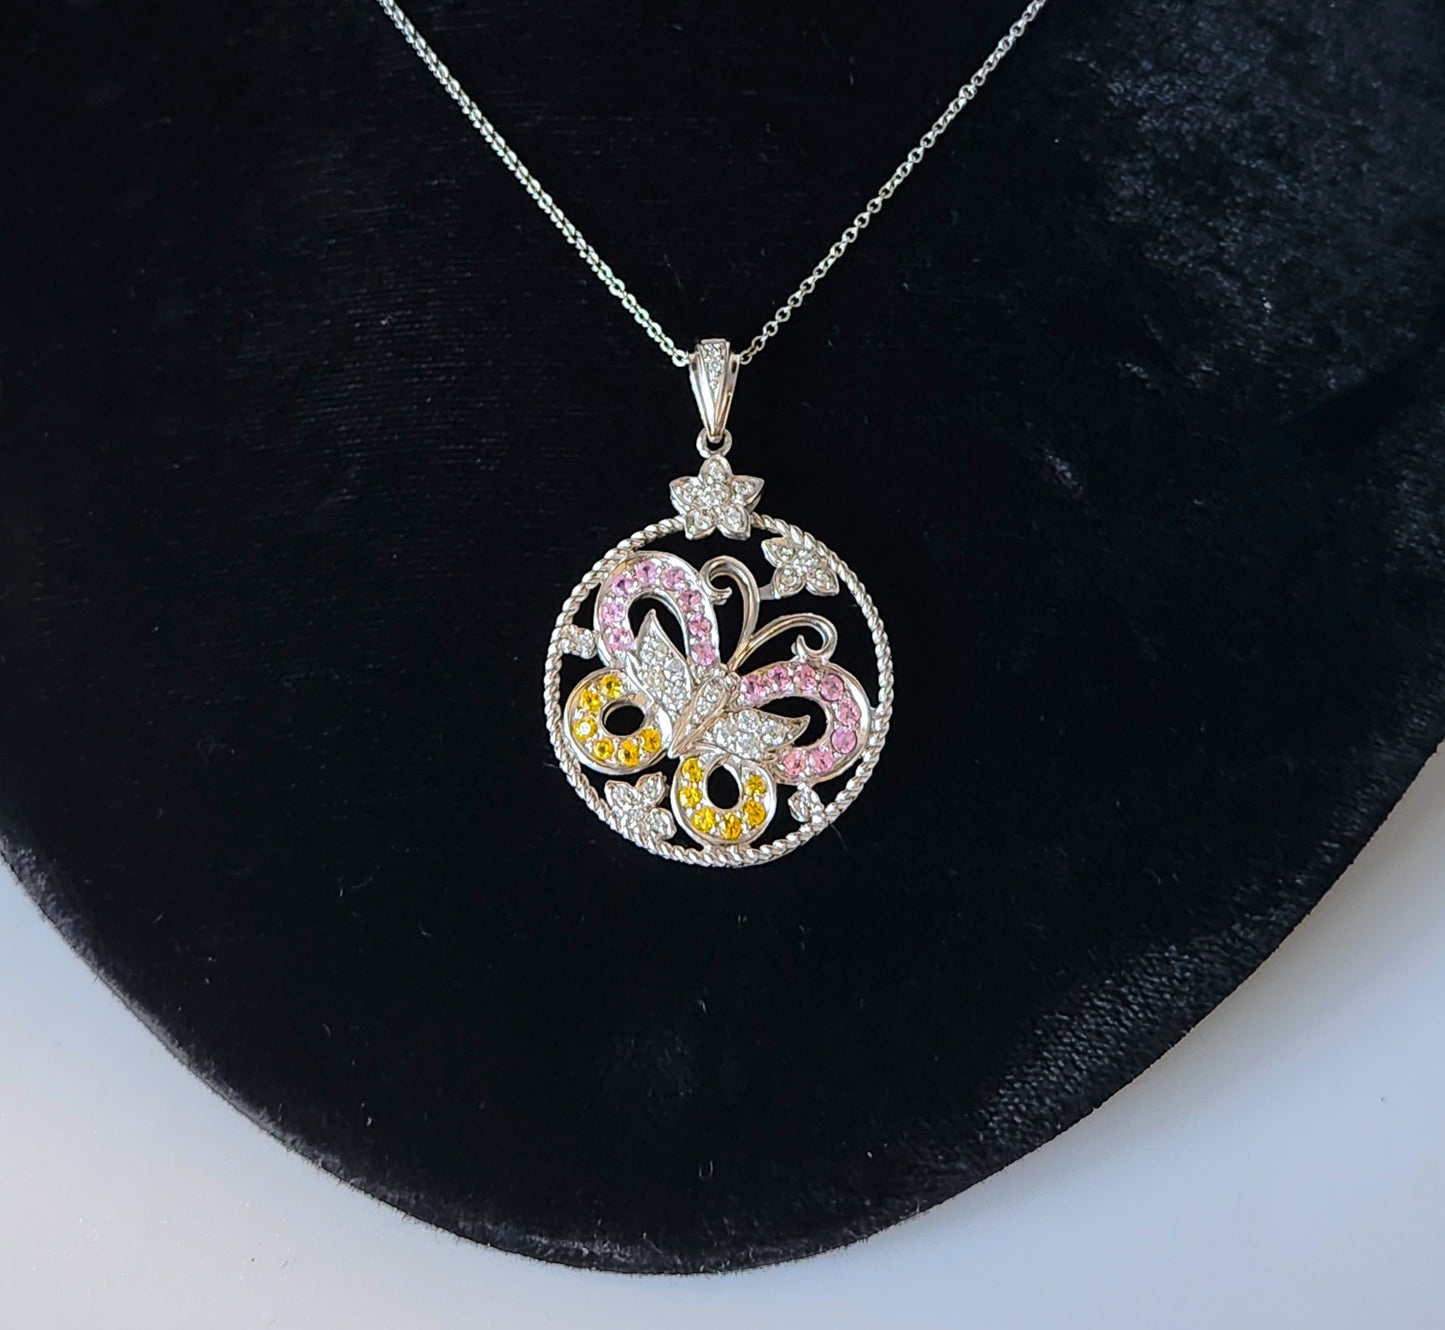 14k White Gold Diamonds Yellow And Pink Sapphires Butterfly Pendant Necklace 18"